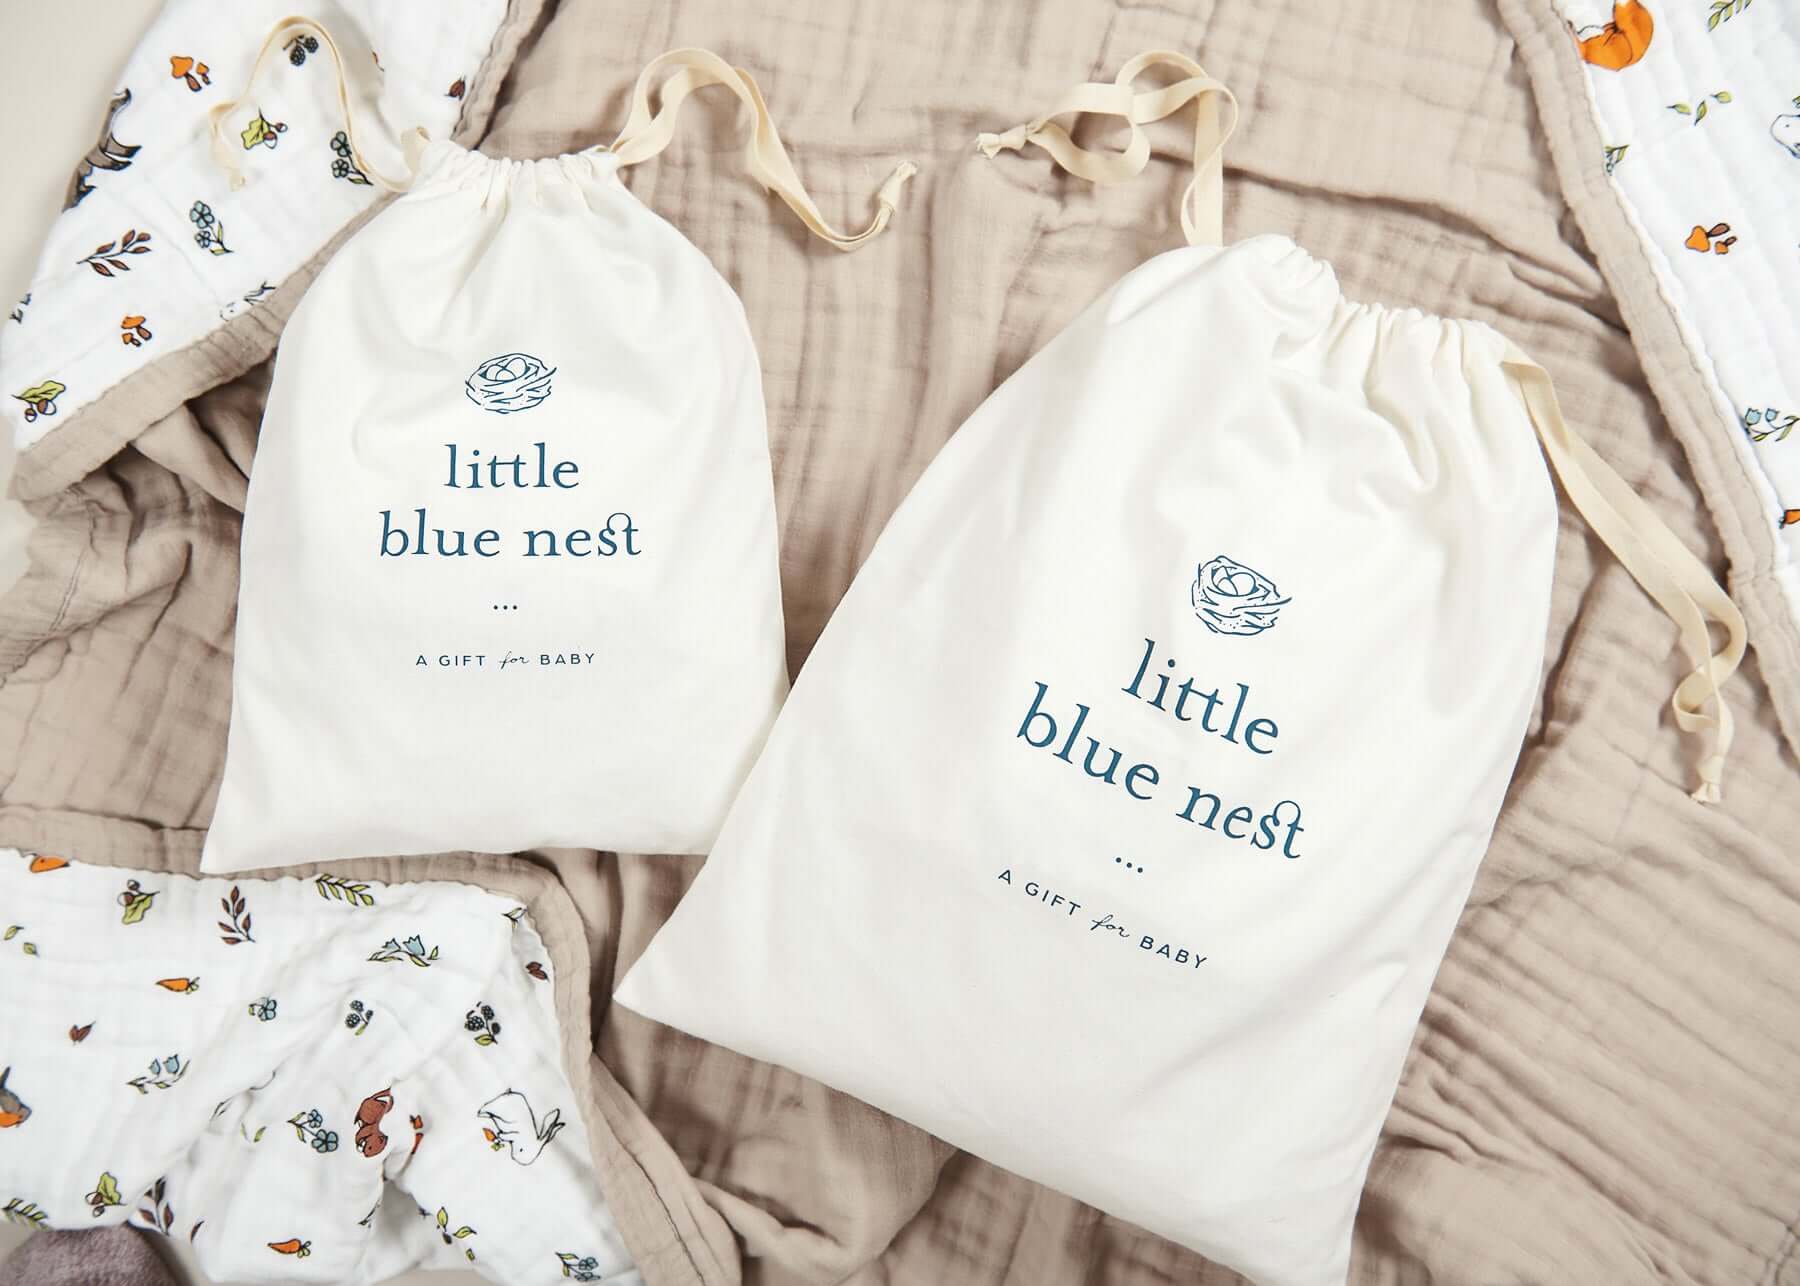 Two Little Blue Nest gift bags